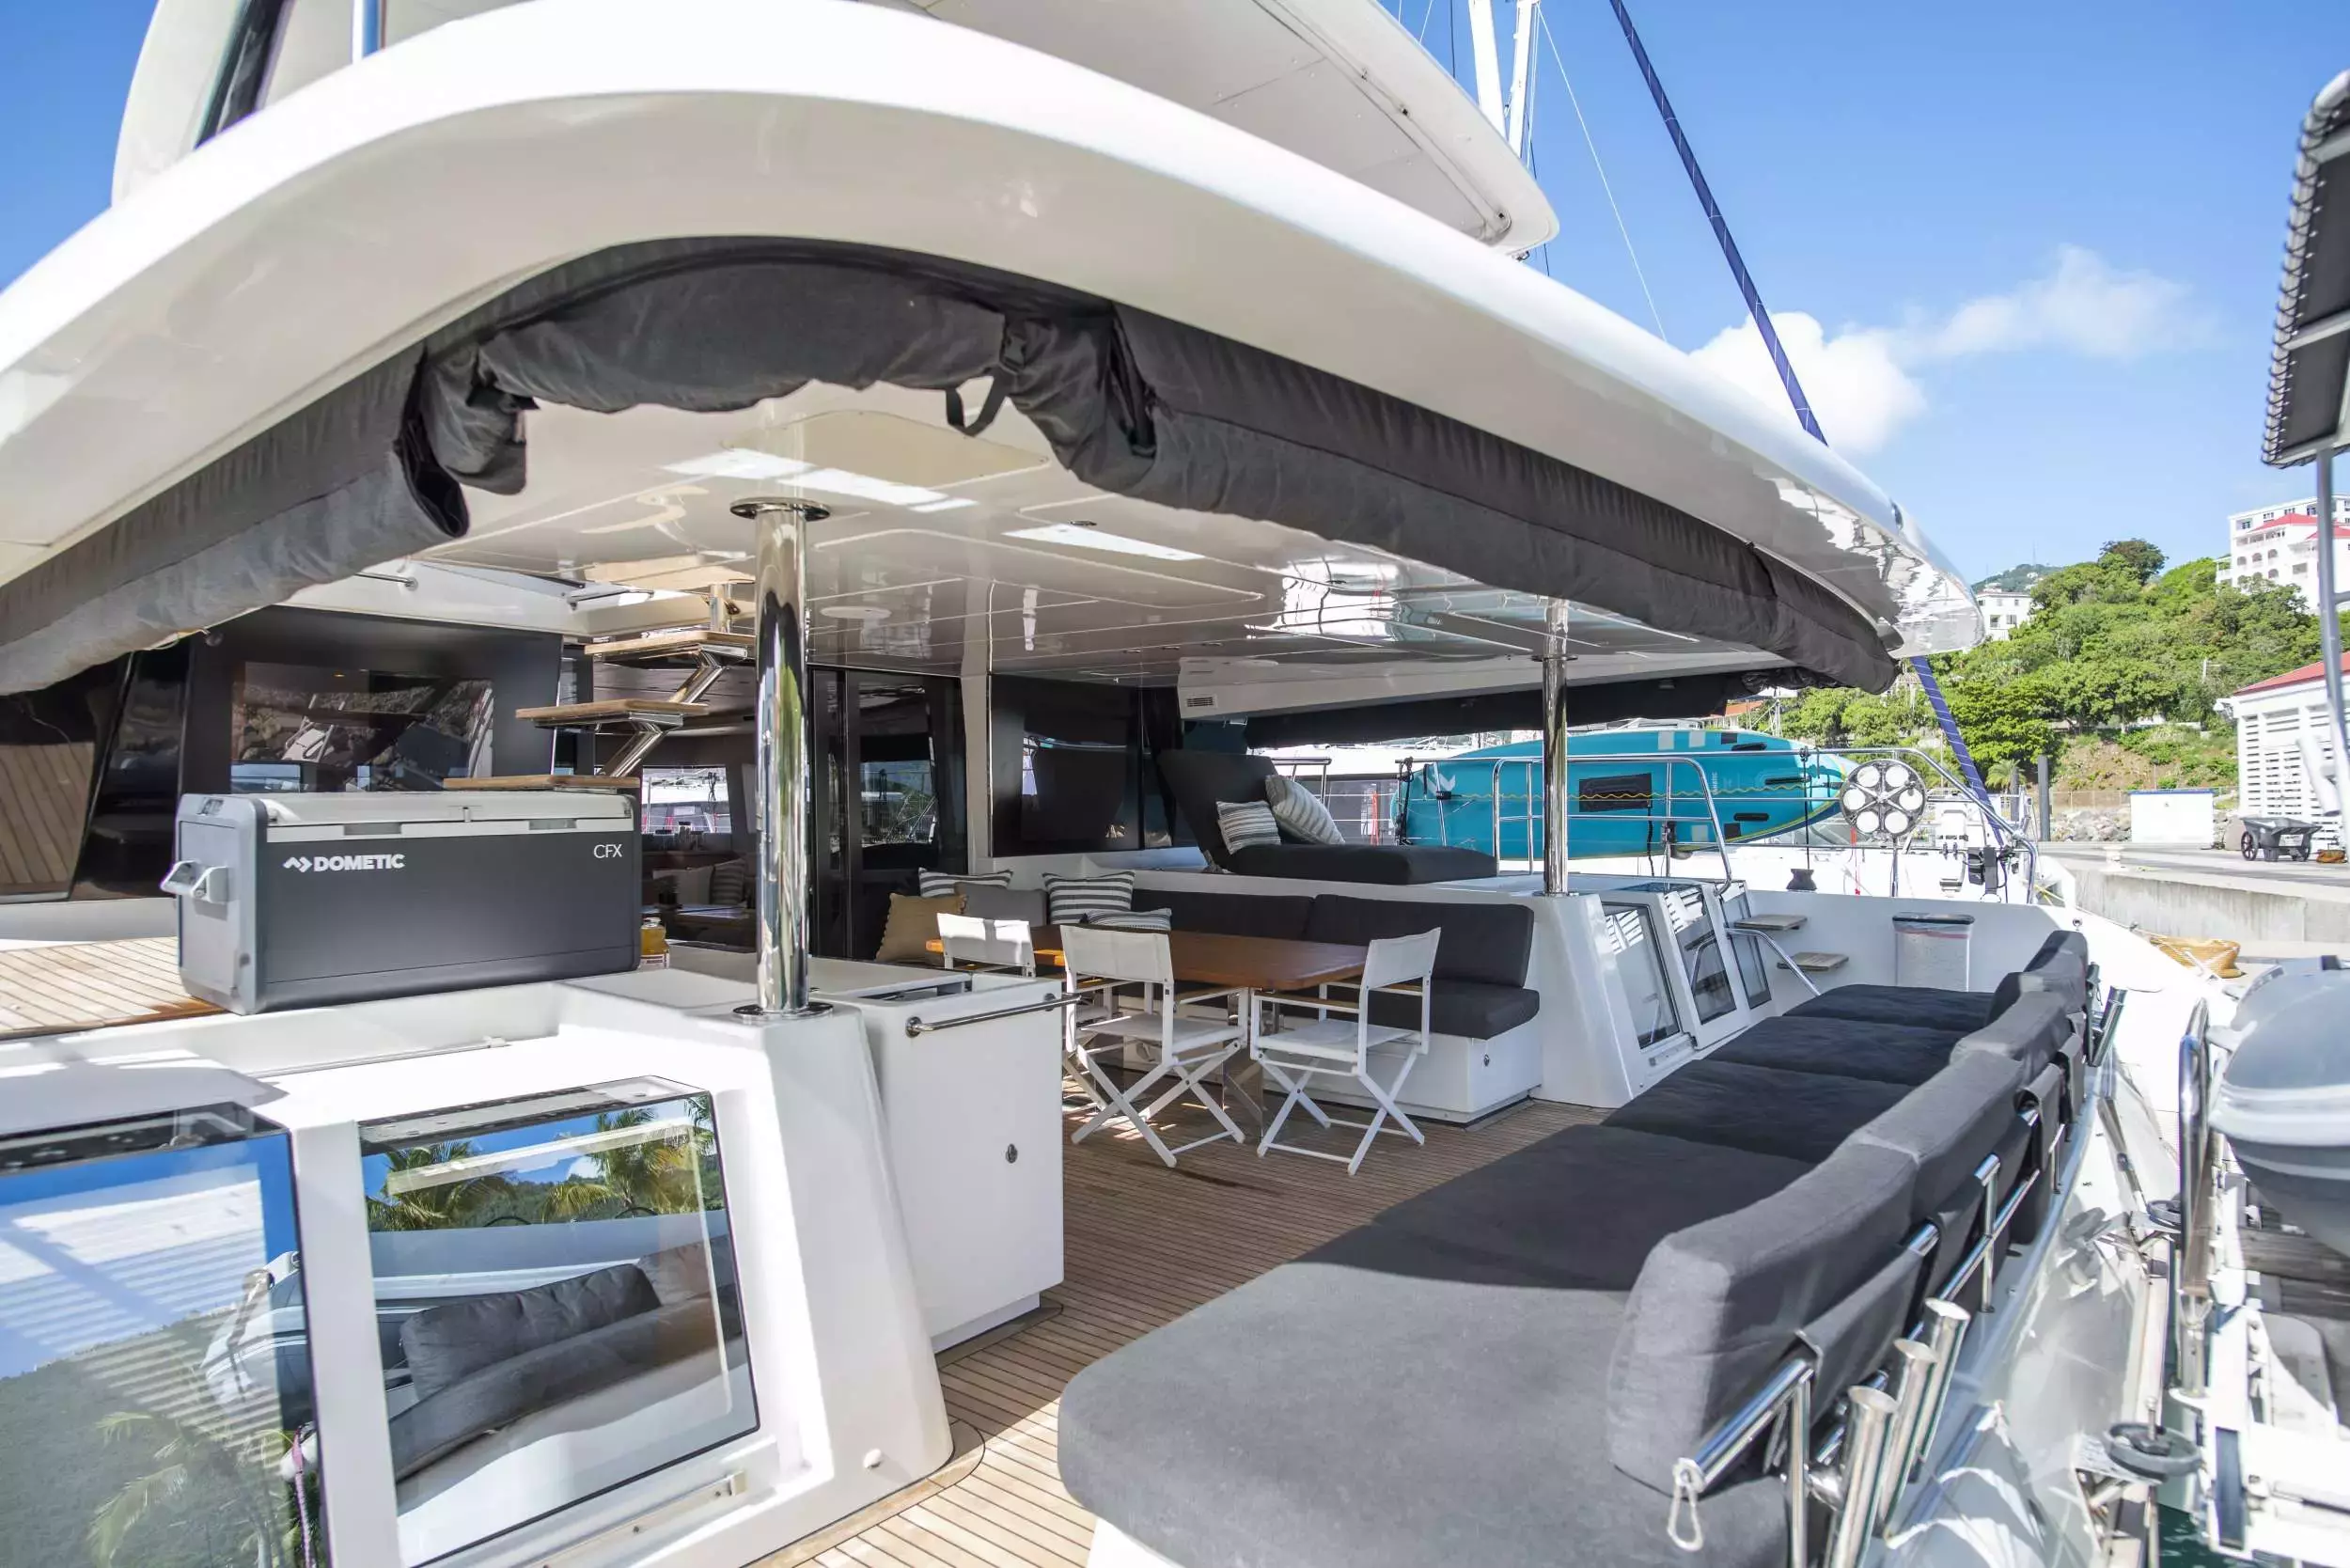 Colette by Lagoon - Top rates for a Rental of a private Power Catamaran in British Virgin Islands